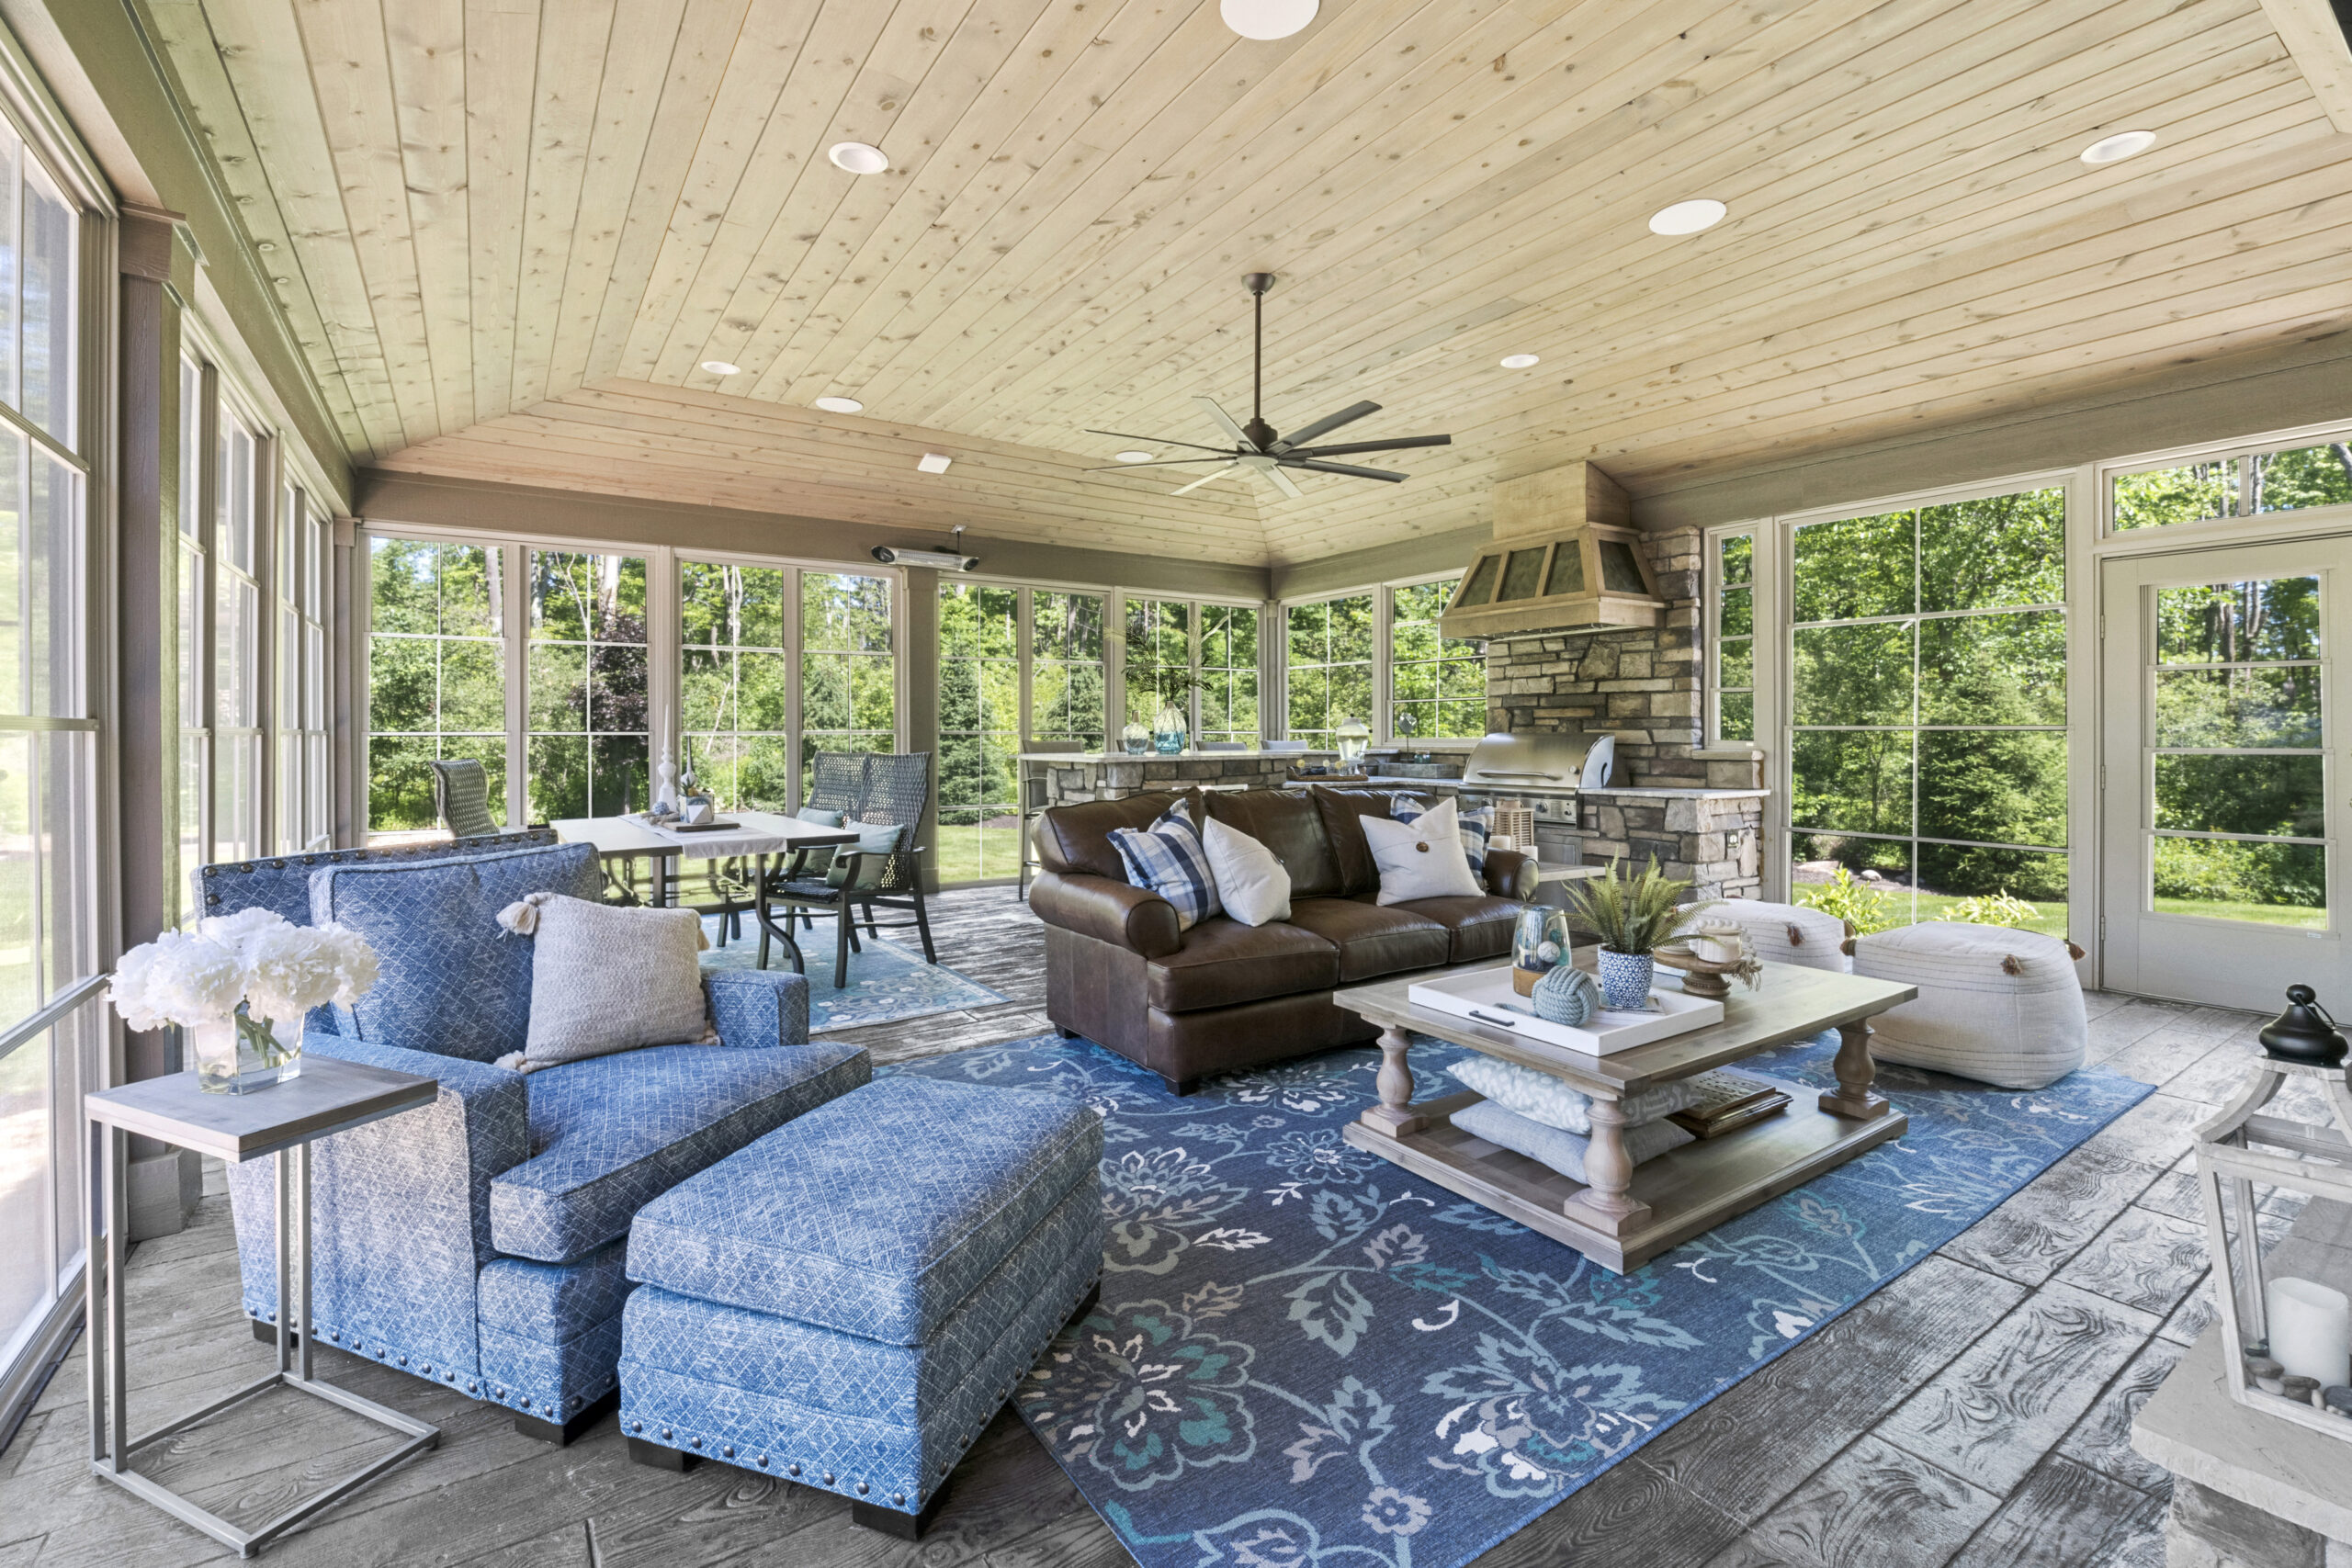 Sun room with grill area, dark leather couch, and light blue rug